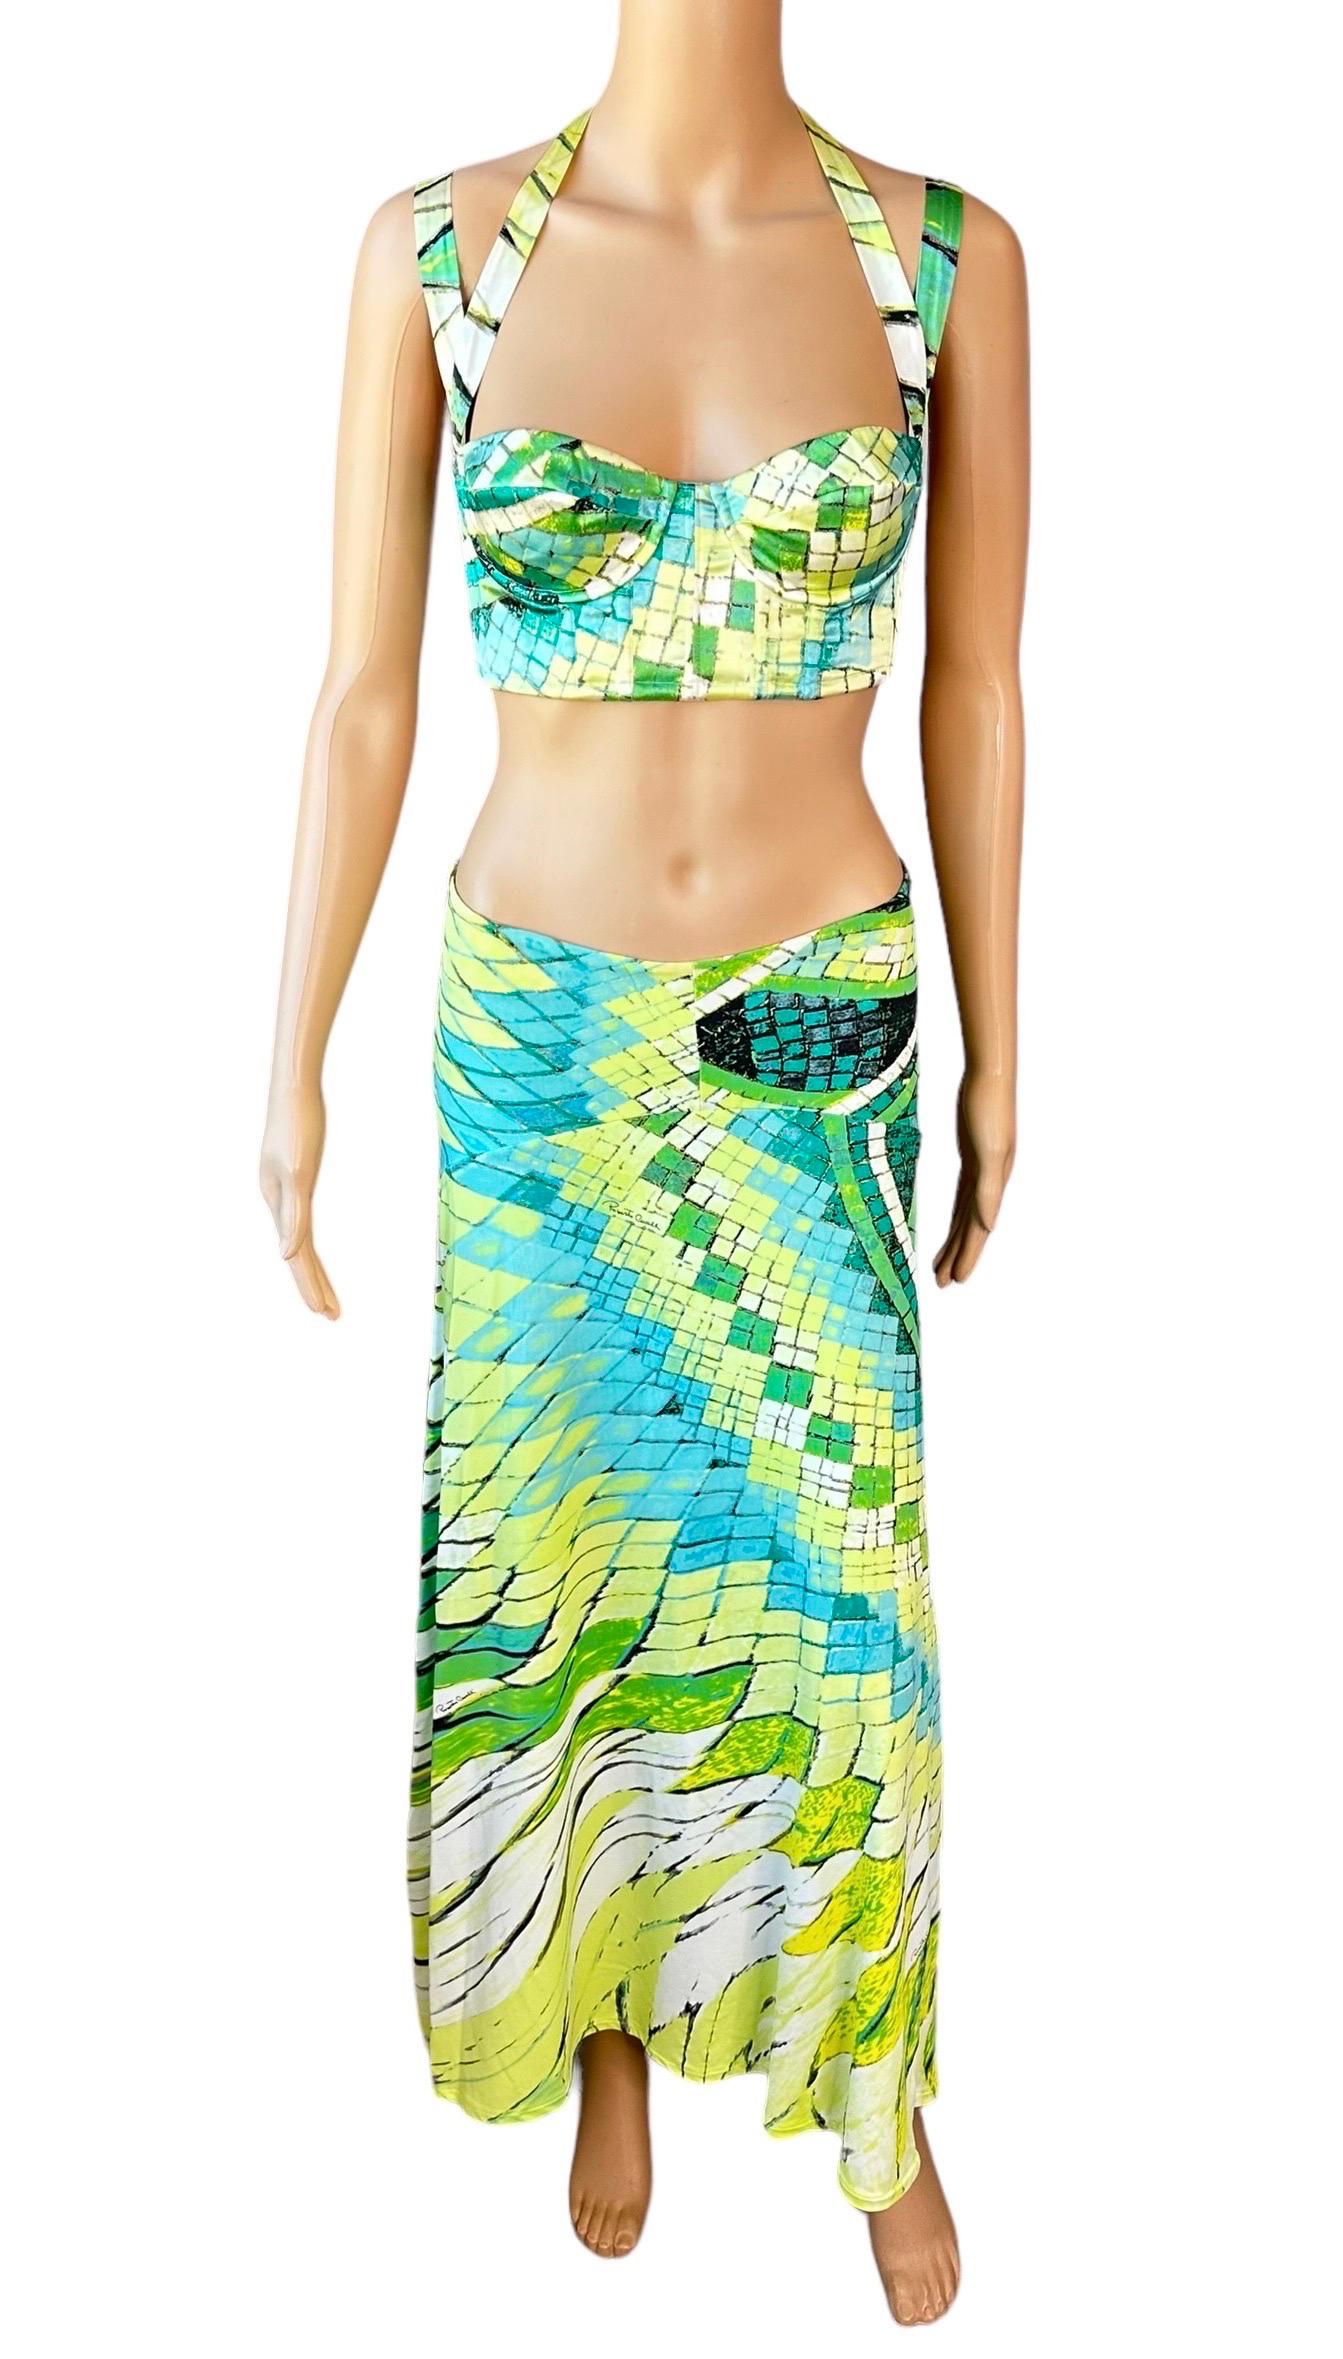 Roberto Cavalli S/S 2004 Silk Metallic Bustier Bra Crop Top & Maxi Skirt Ensemble 2 Piece Set Size S

Please note the skirt is missing the size tag and the bustier bra has one feather embellishment attached as pictured.

